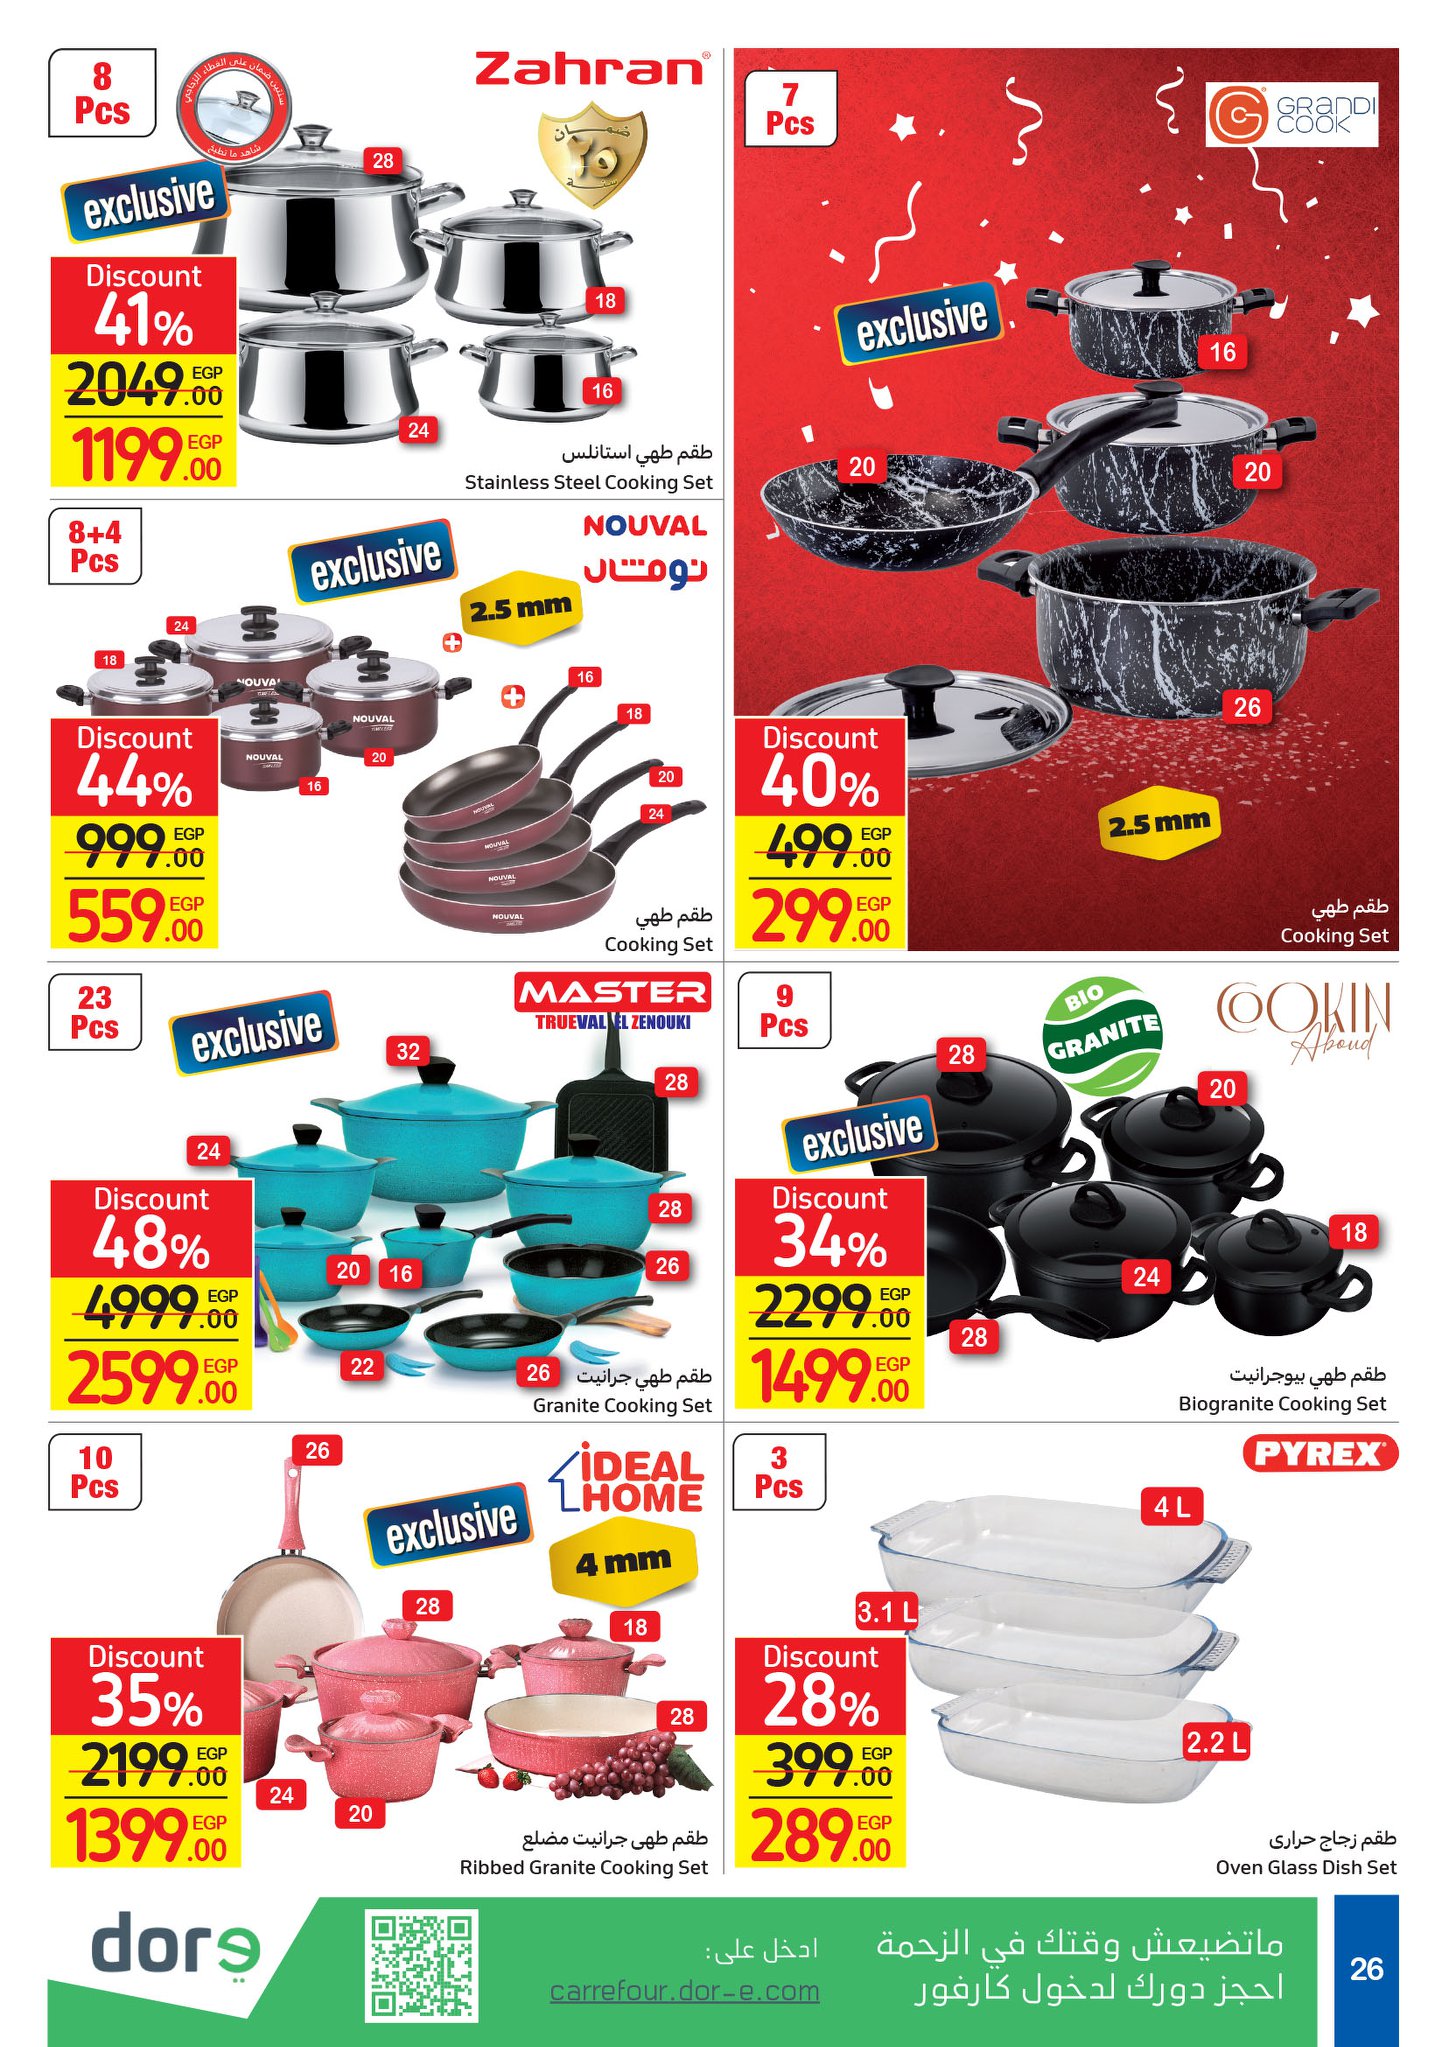 The entire Christmas catalog of Carrefour Christmas 2021 offers 25